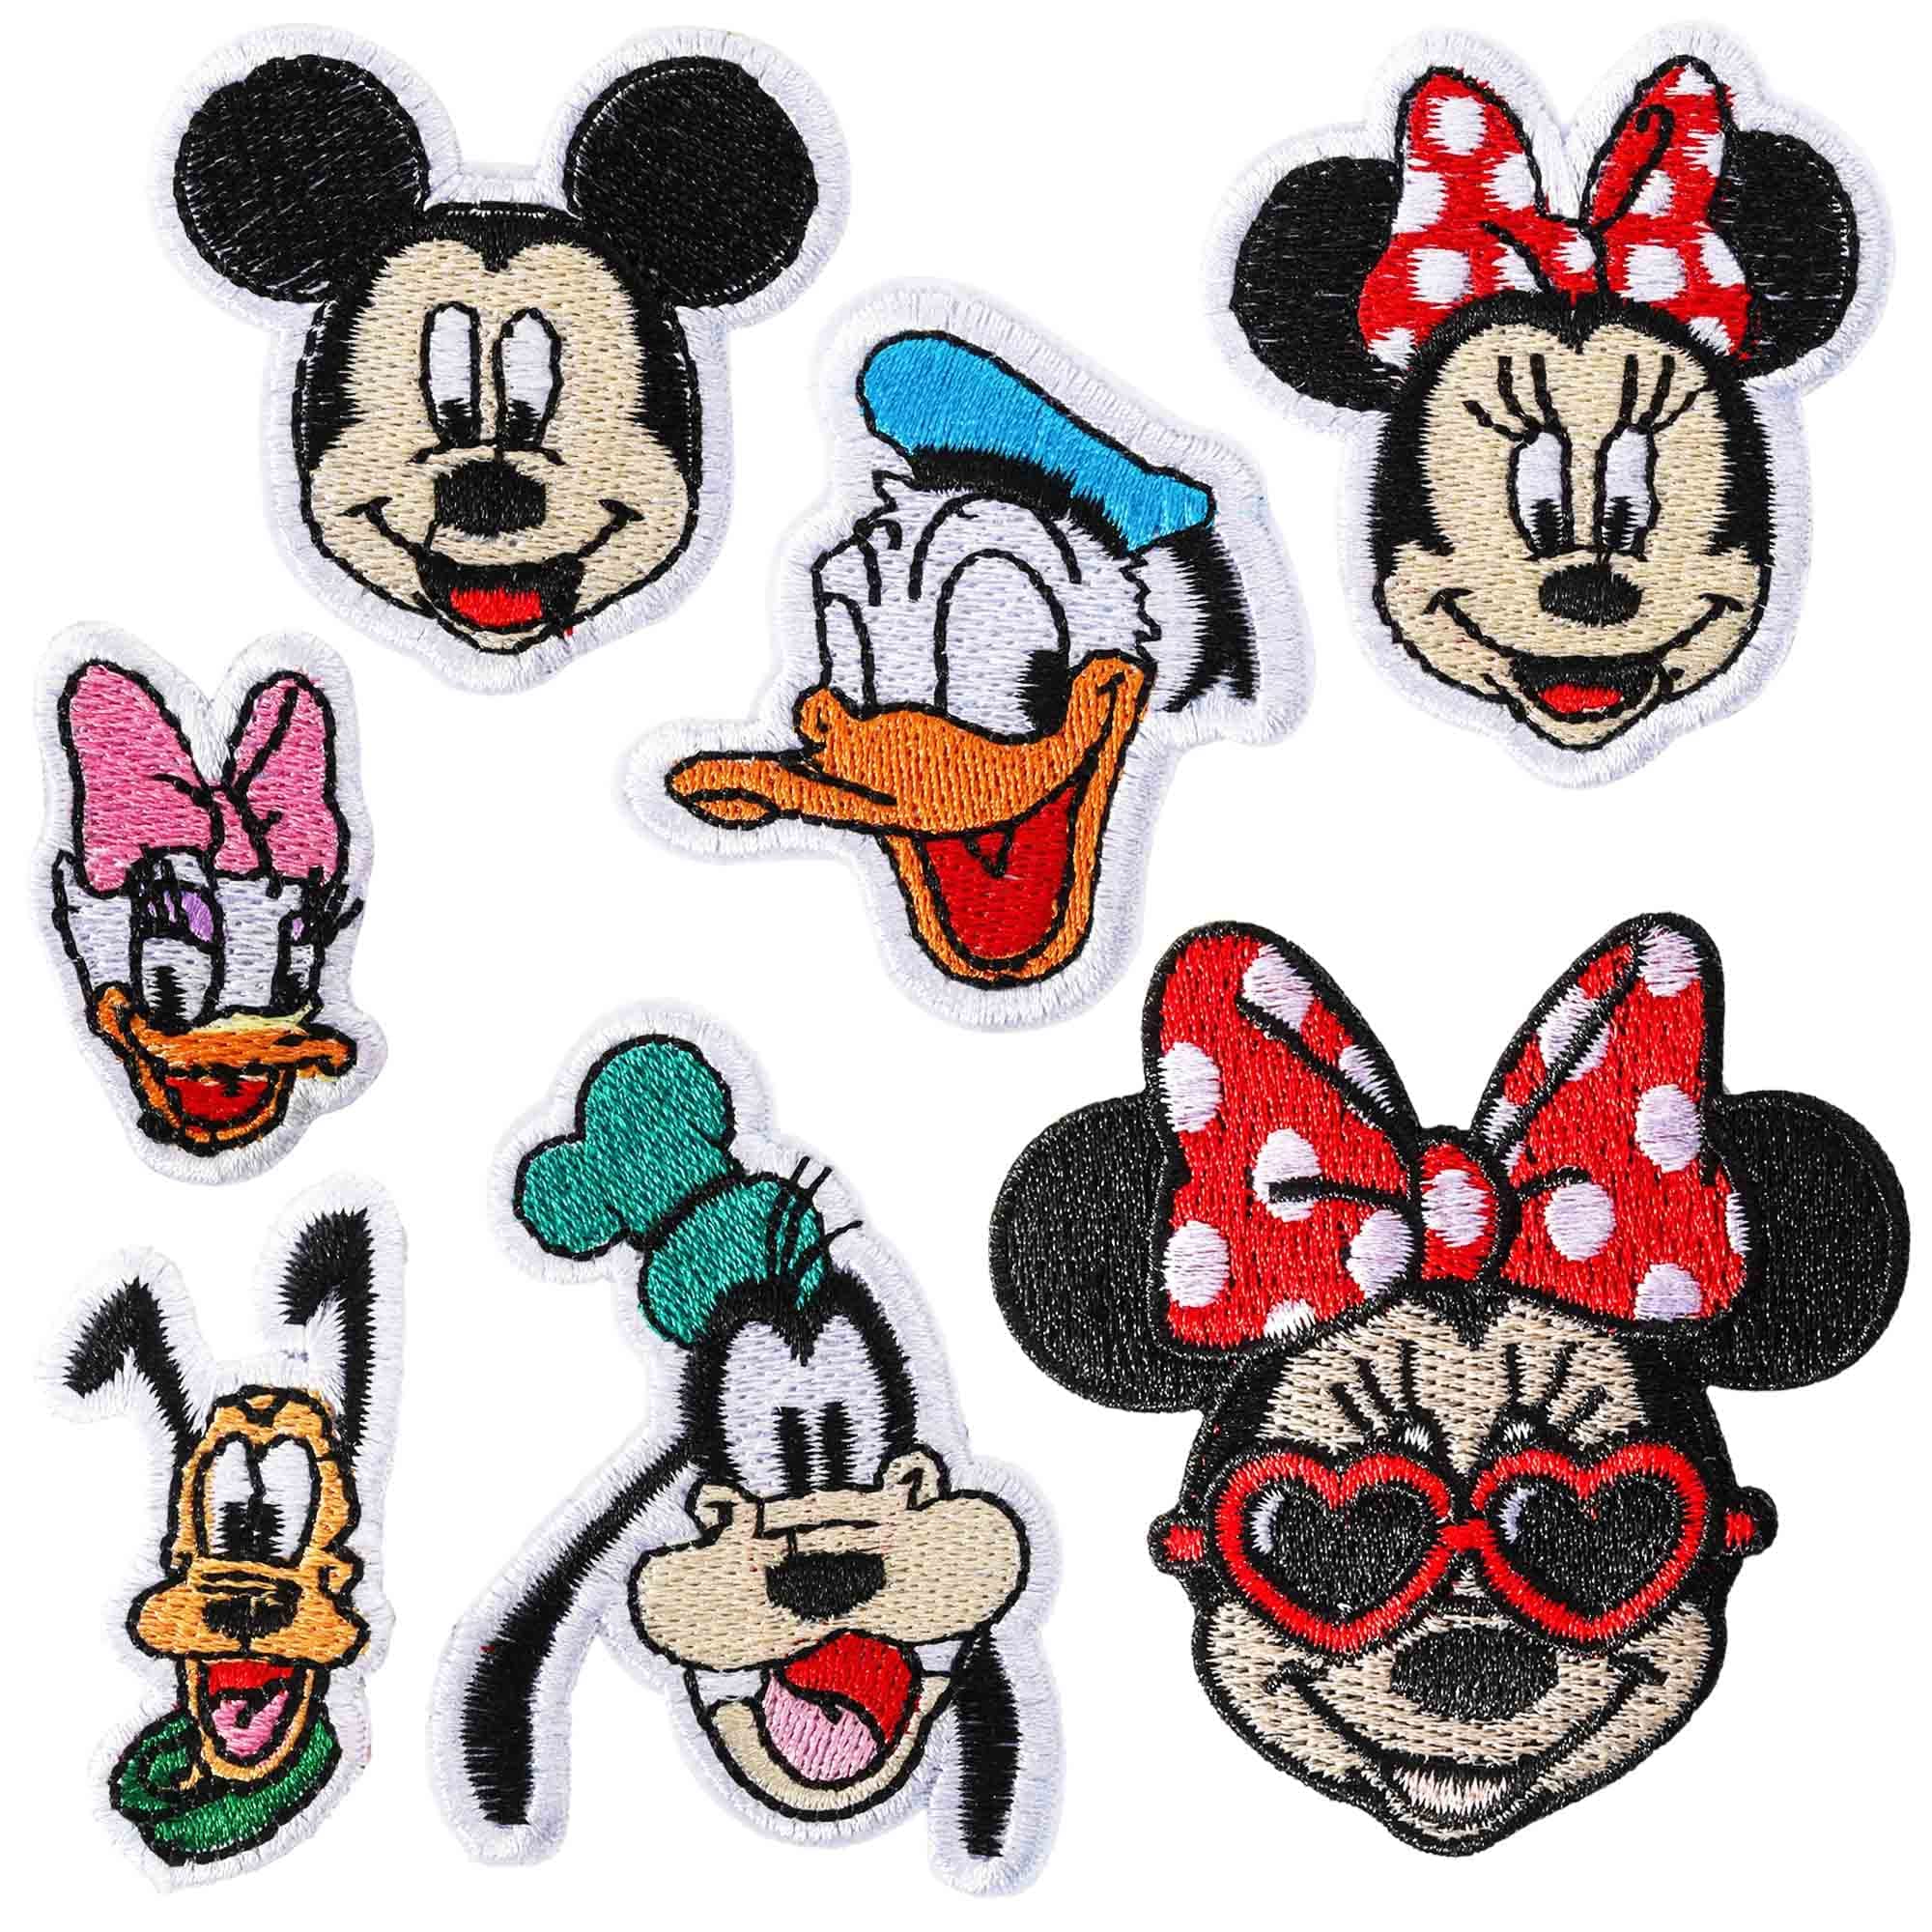 7Pcs Cute Cartoon Mouse Applique Embroidered Patches, Anime Mouse Patch Iron  On or Sew On for T-Shirts, Jeans,Hats,Bags mouse patches